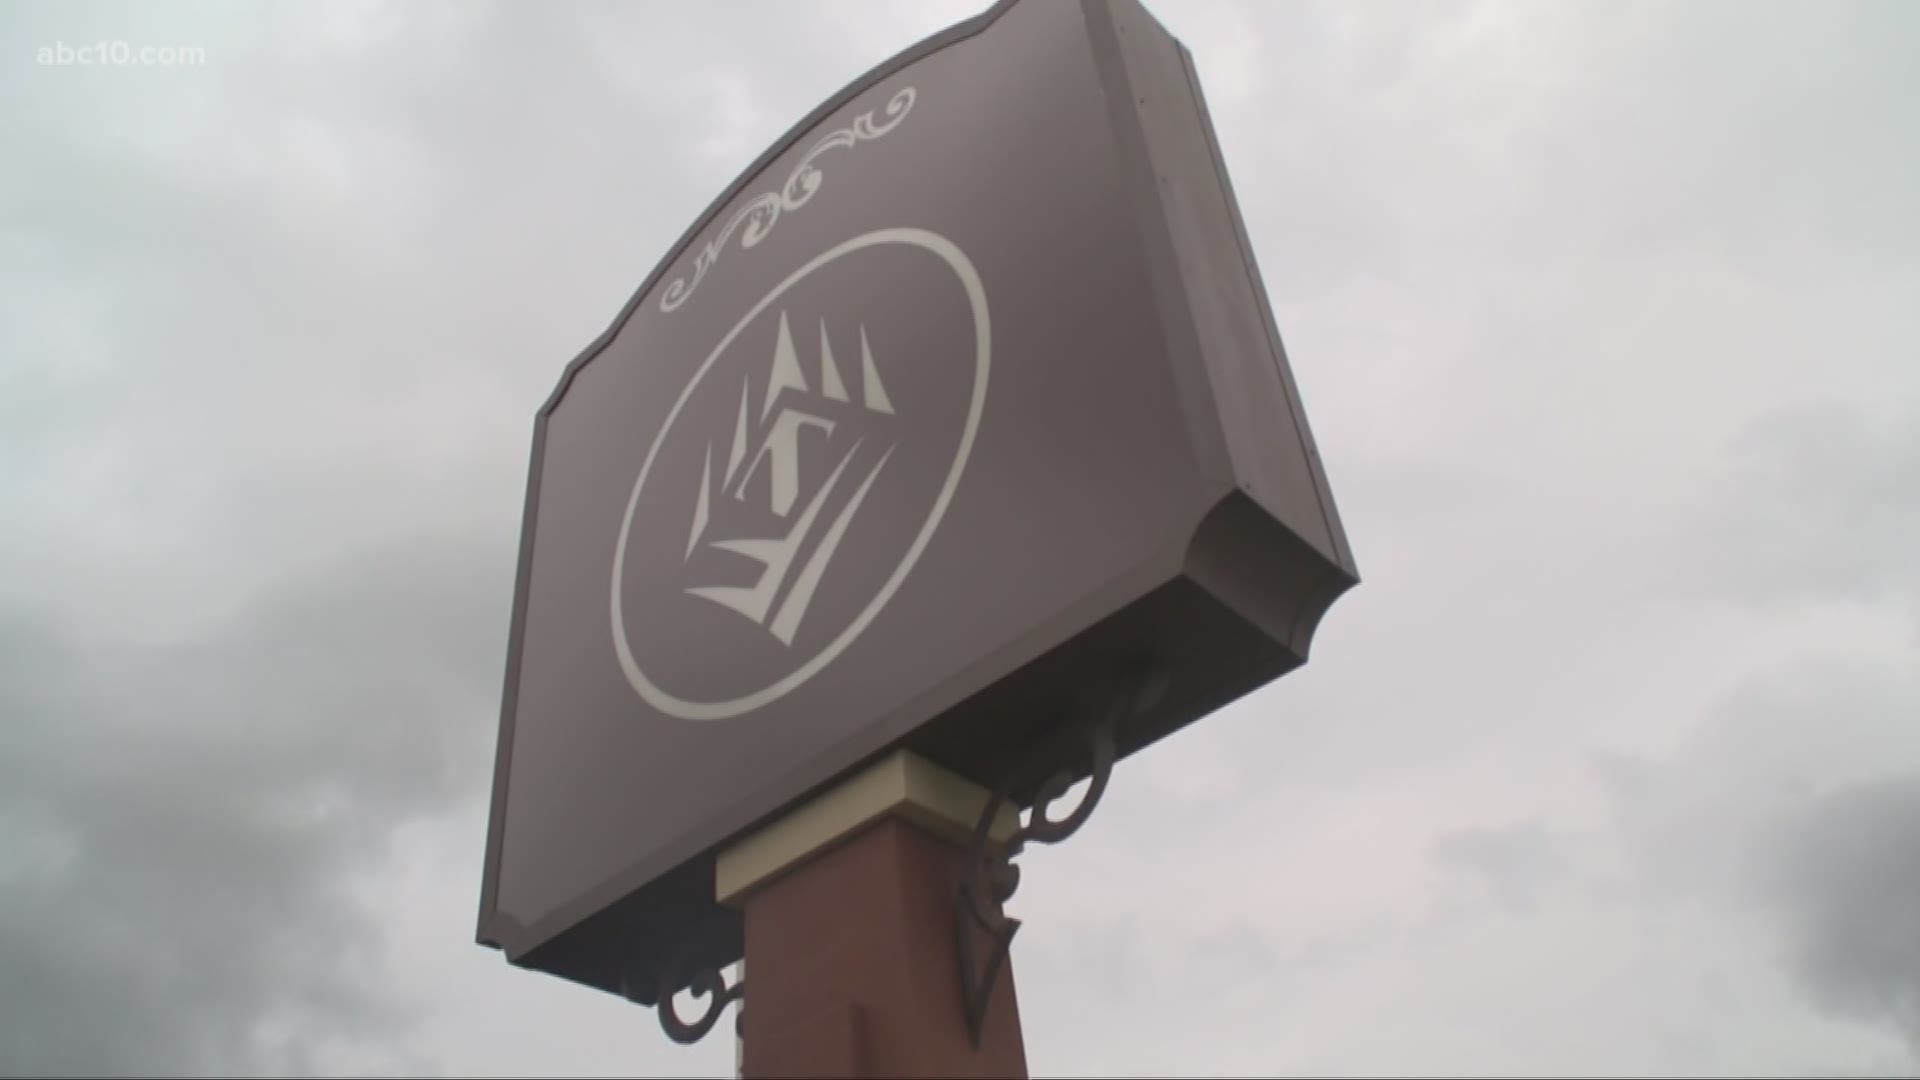 Several Thunder Valley Casino Resort workers told ABC10 on the condition of anonymity that they're worried they'll lose pay and benefits because of the closure.